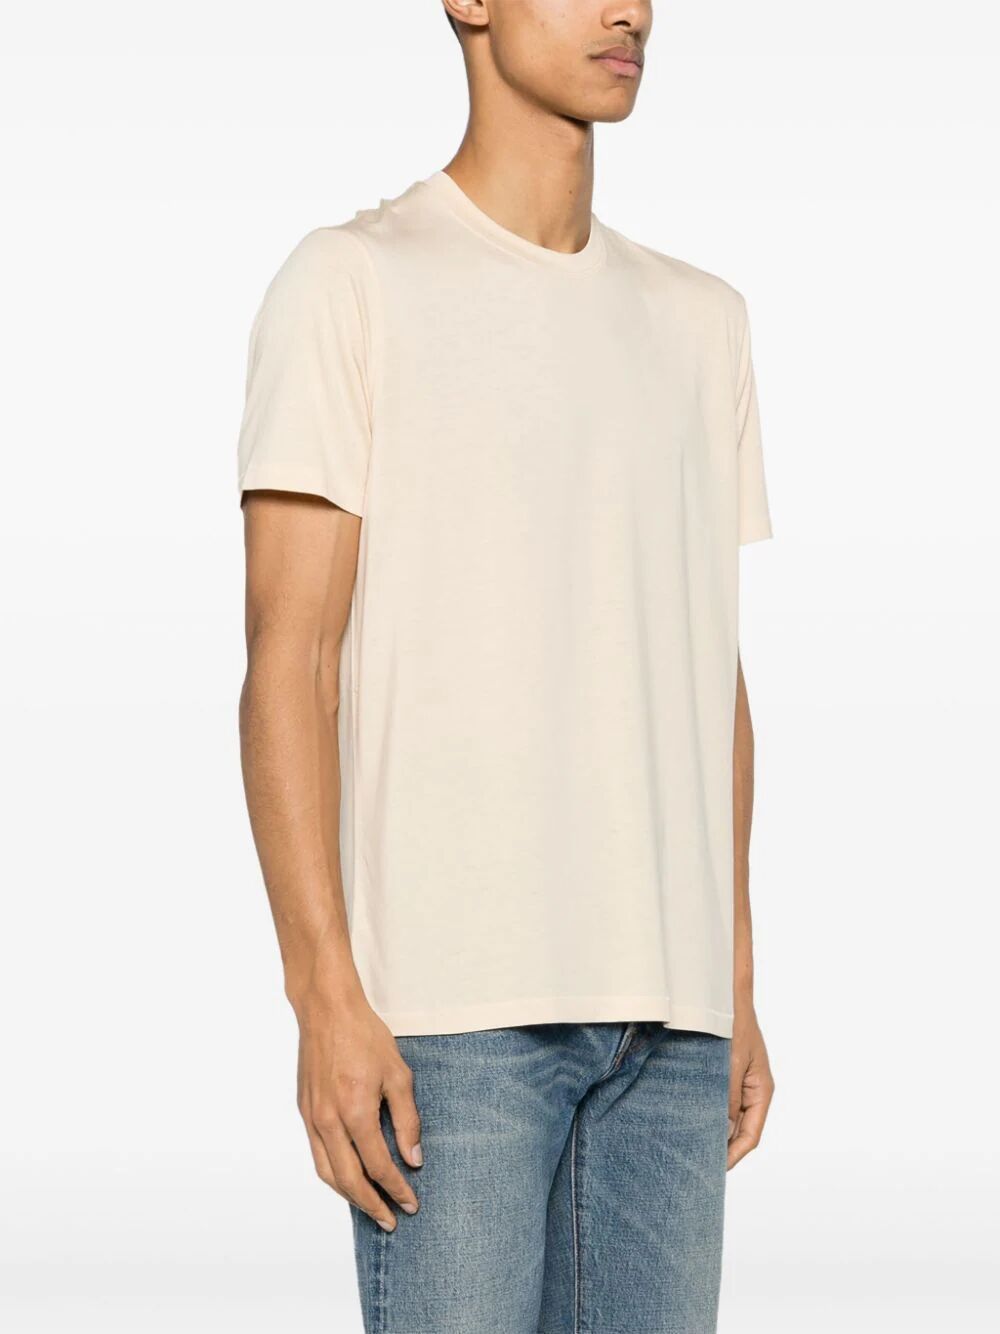 Shop Tom Ford Cut And Sewn Crew Neck T In Brown